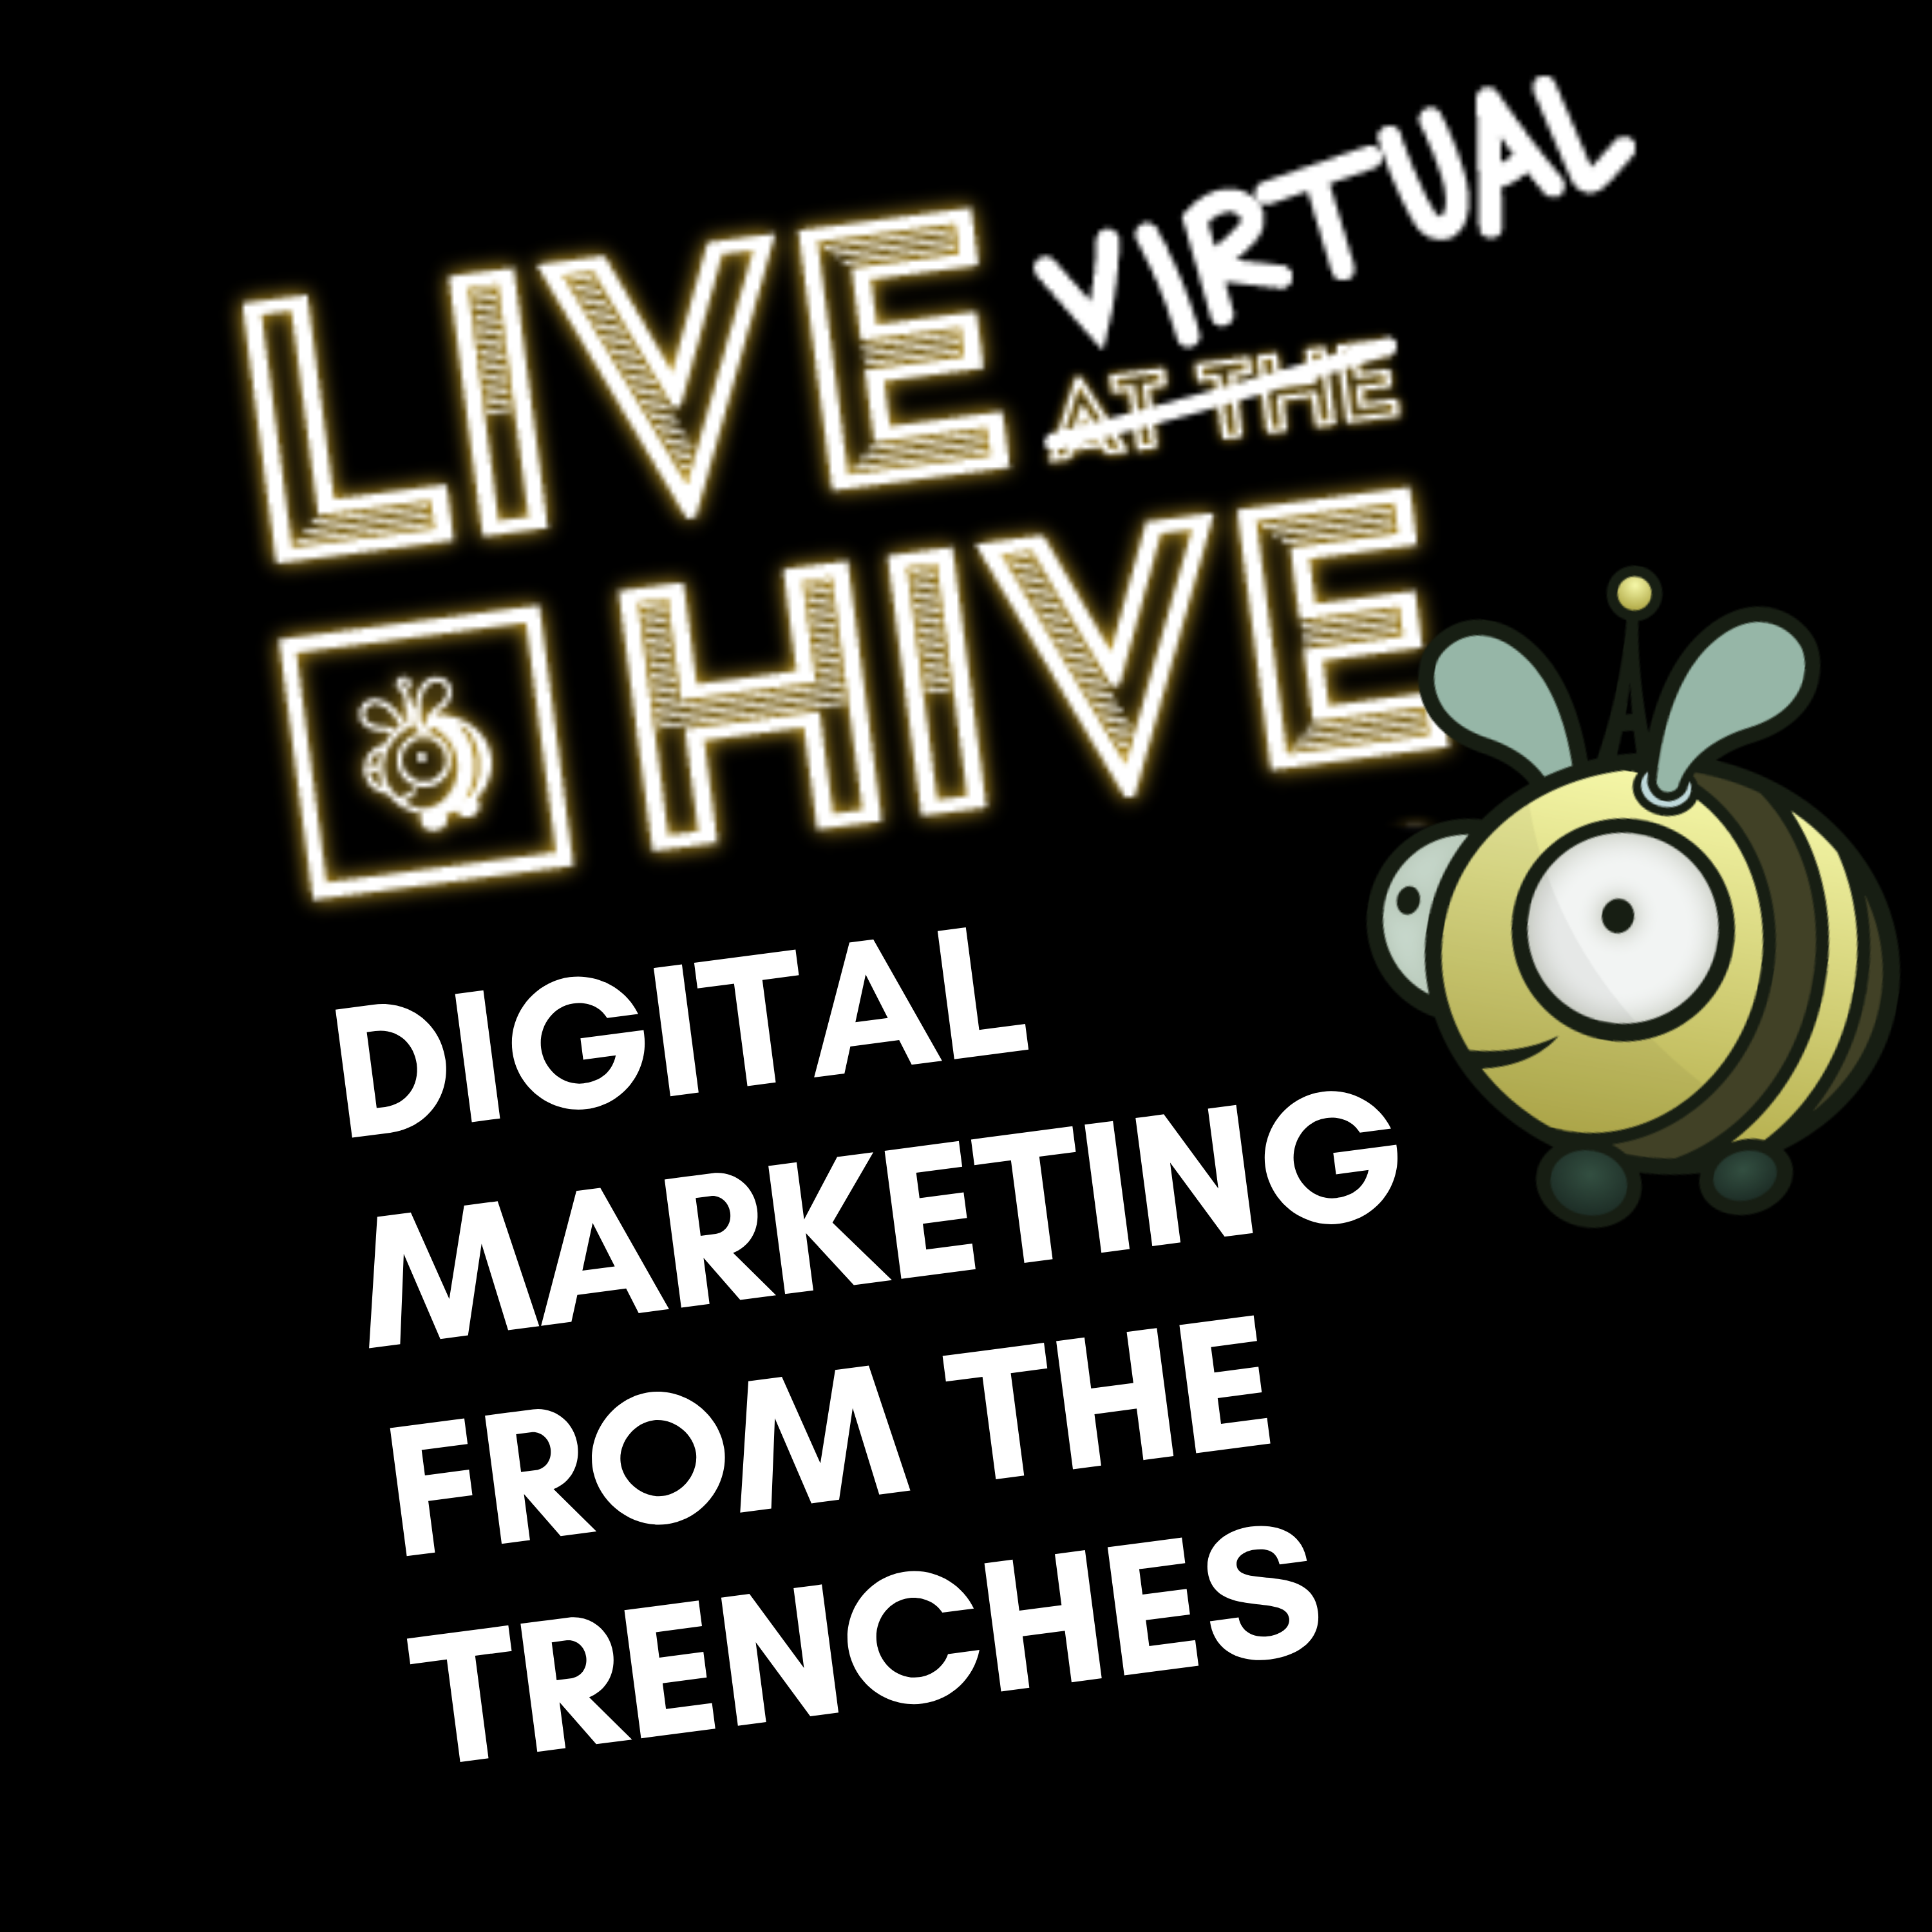 Digital Marketing from the Trenches Live at the Hive